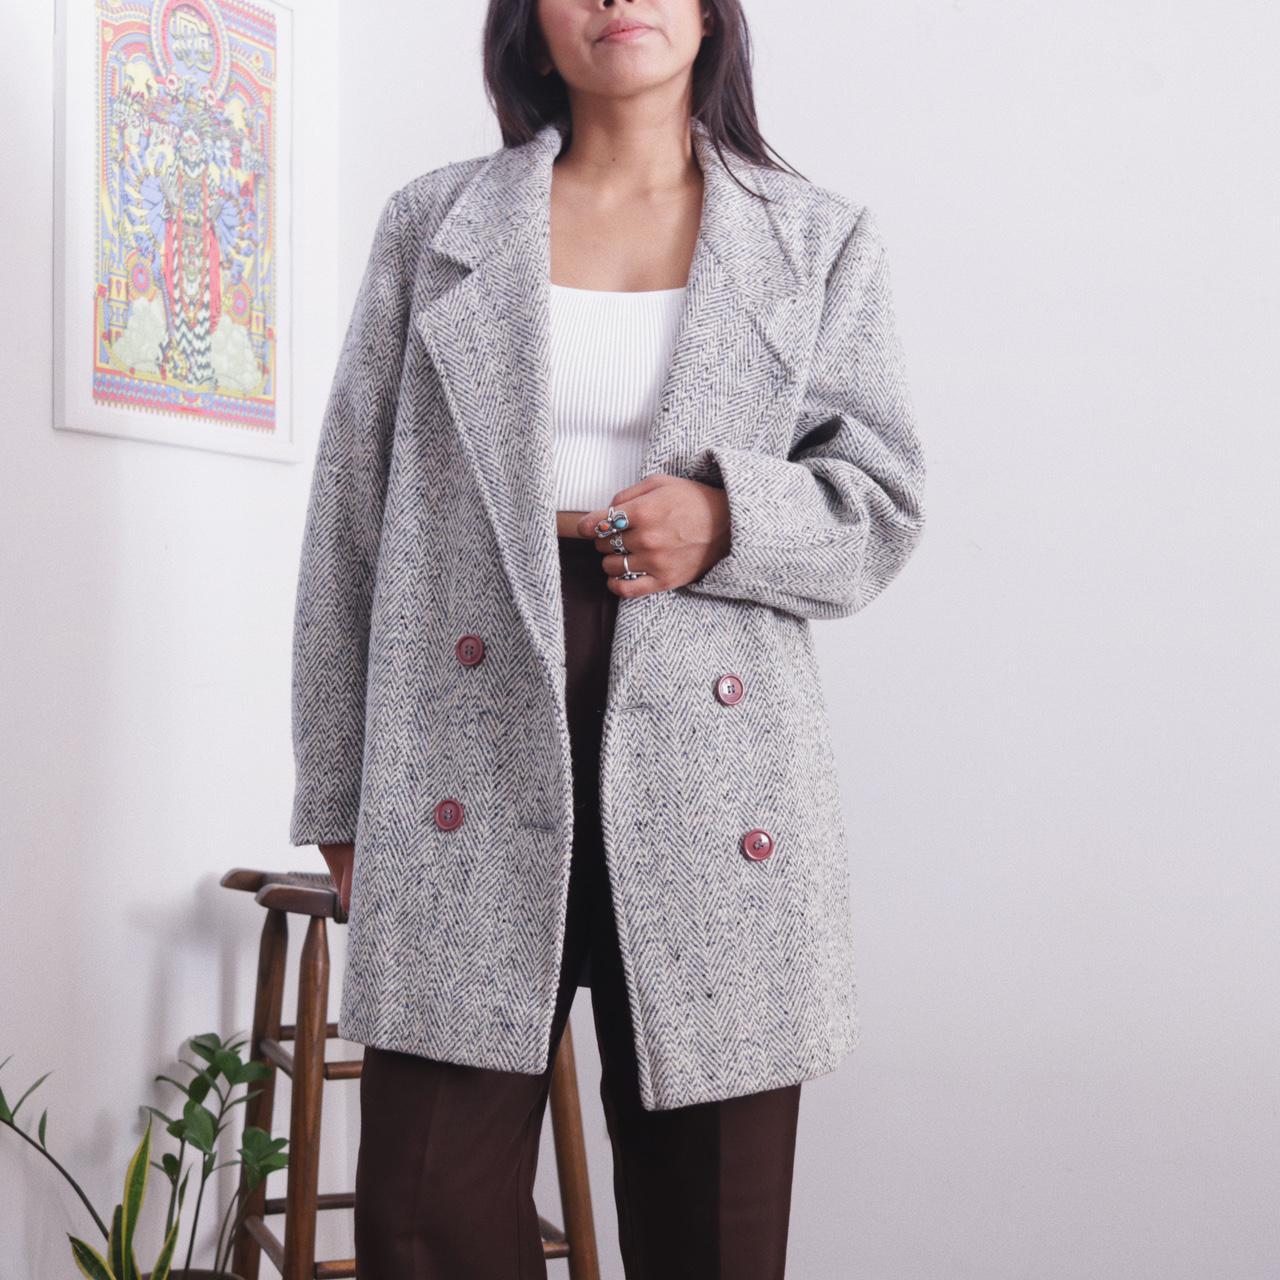 Product Image 2 - vintage 60s tweed peacoat

DESCRIPTION
the perfect